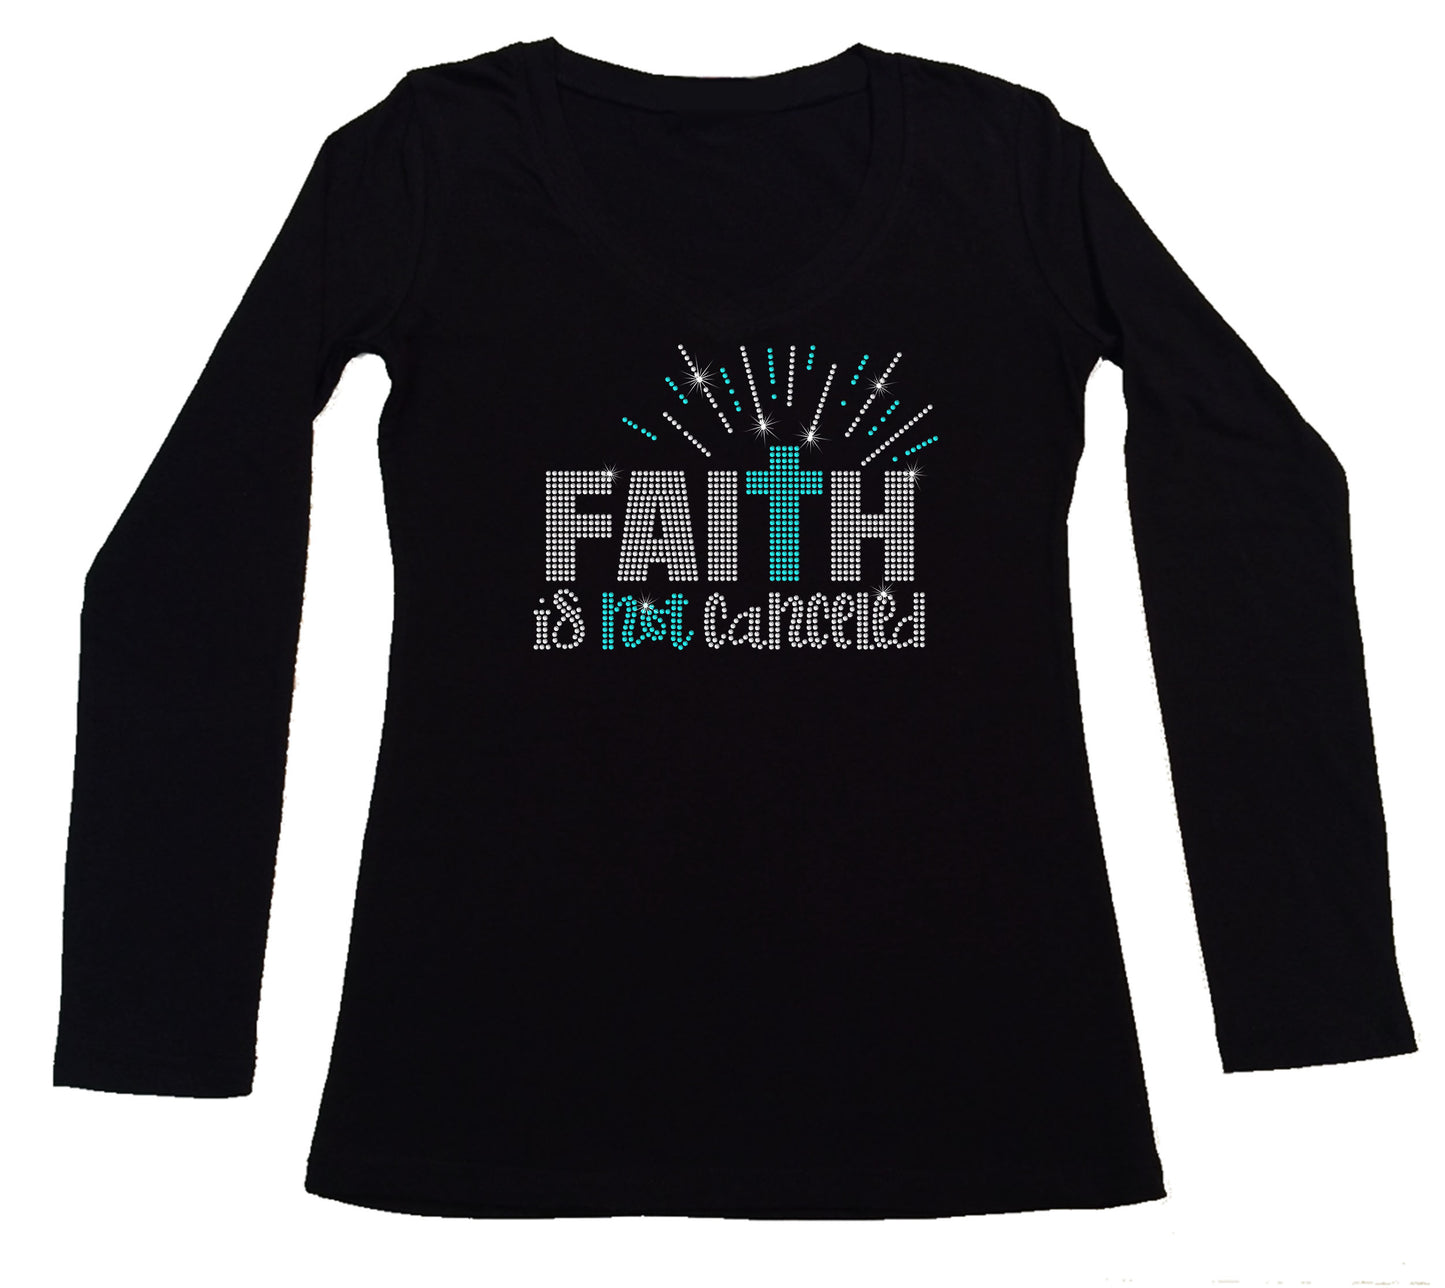 Women's Rhinestone Fitted Shirt Faith is Not Canceled